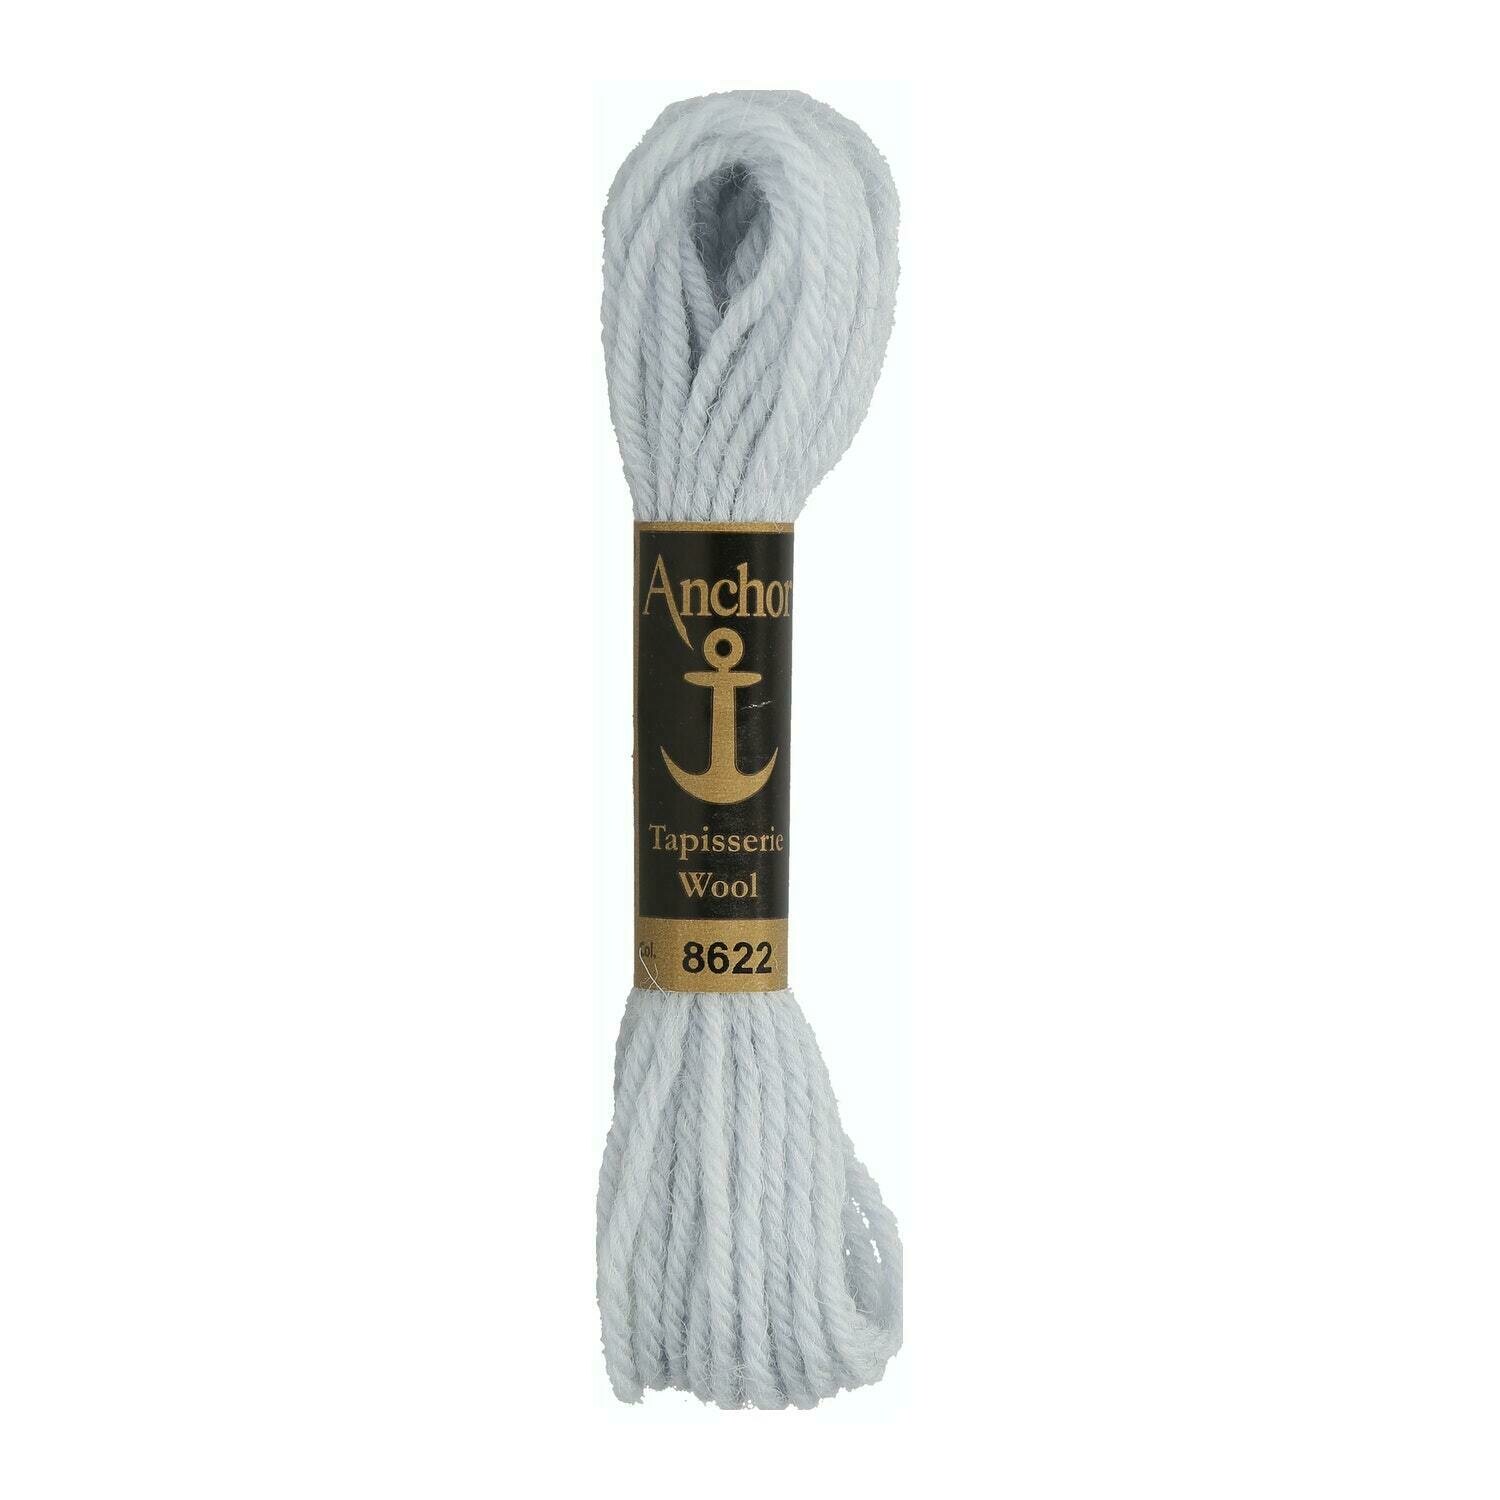 Anchor Tapisserie Wool #08622